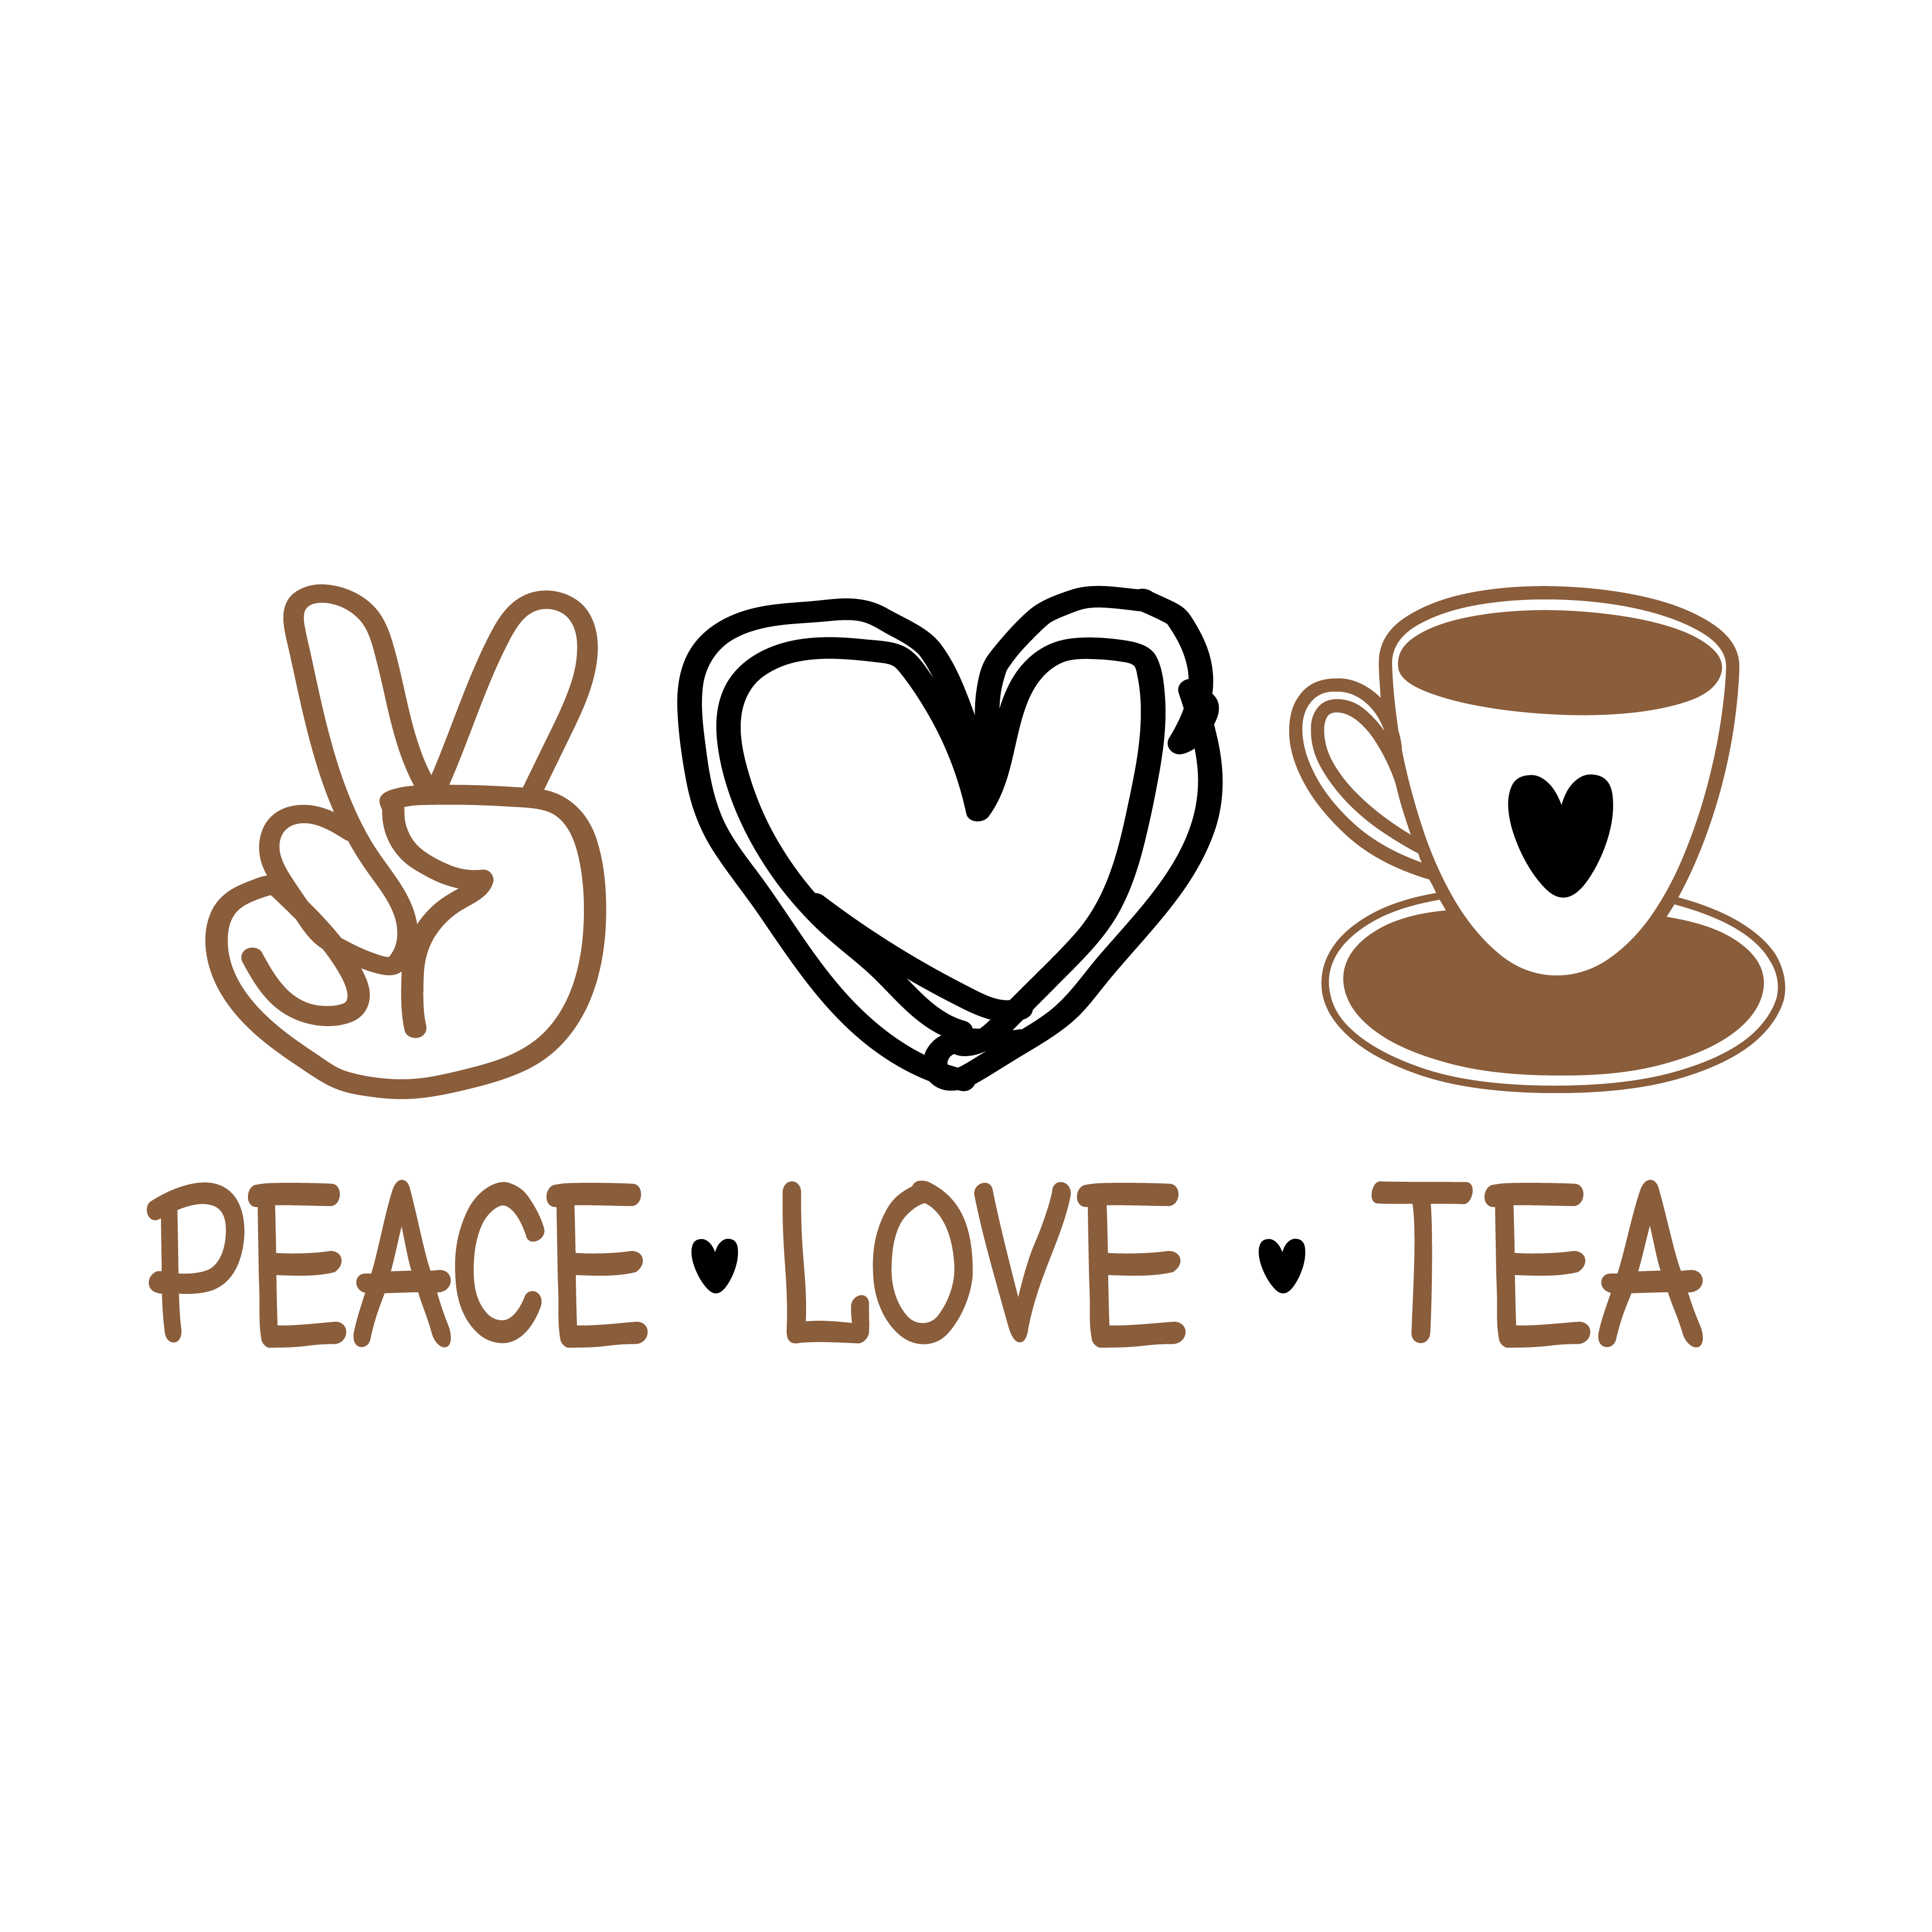 peace love tea, tea sayings, tea quotes, Cricut designs, free, clip art, svg file, template, pattern, stencil, silhouette, cut file, design space, short, funny, shirt, cup, DIY crafts and projects, embroidery